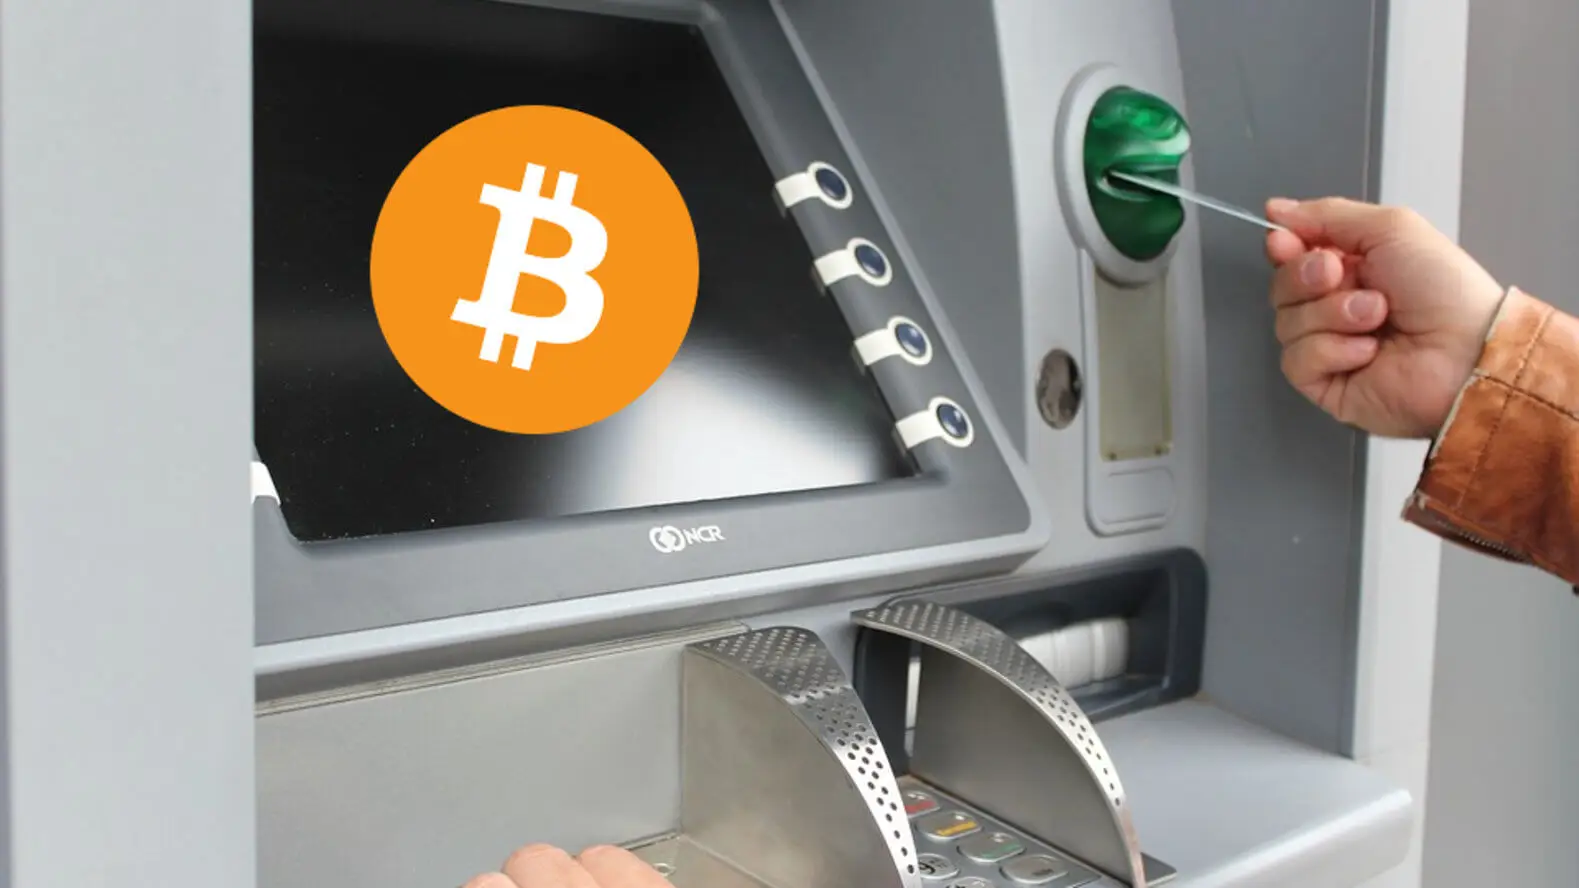 https://cryptolighty.com/installation-of-cryptocurrency-atm-machines/